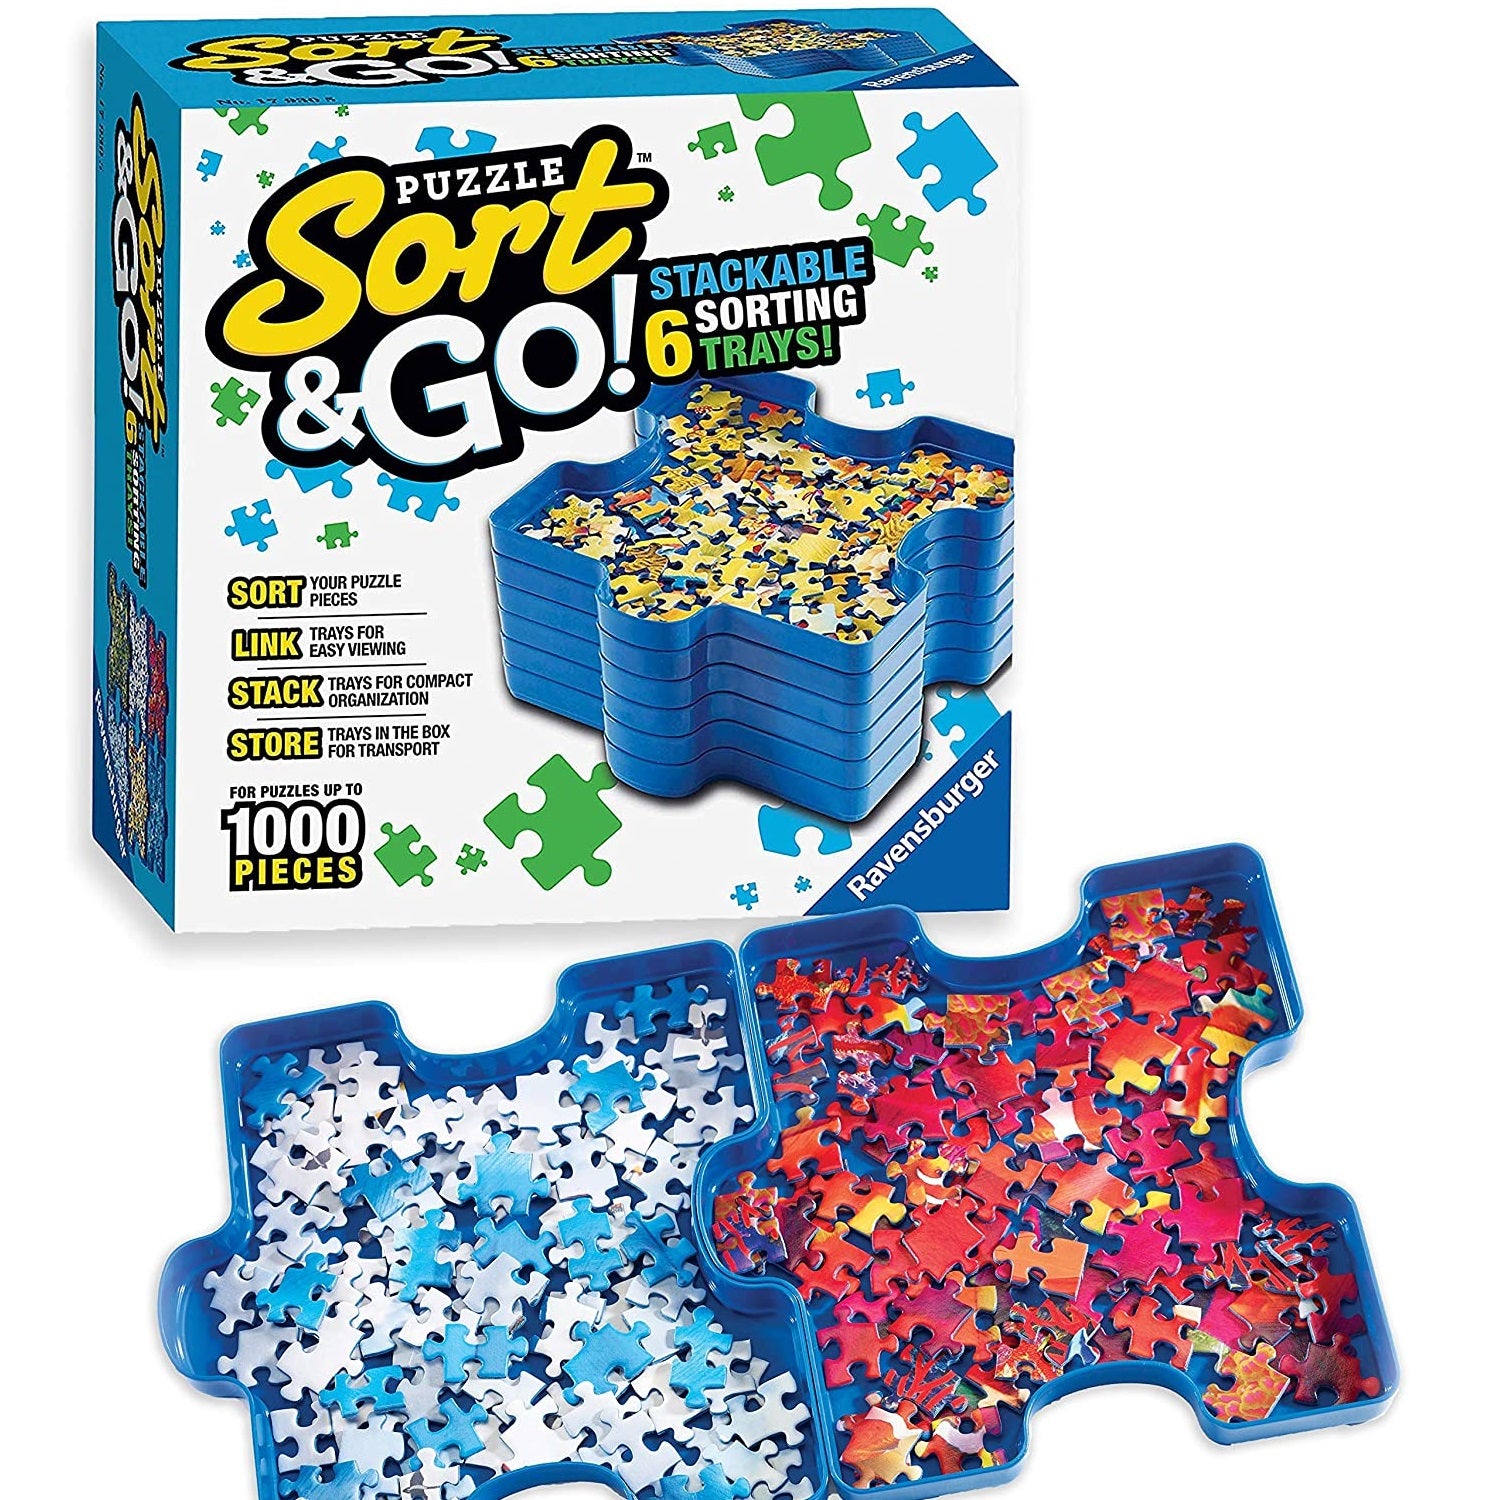 Sort & Go! 6 Puzzle Sorting Trays